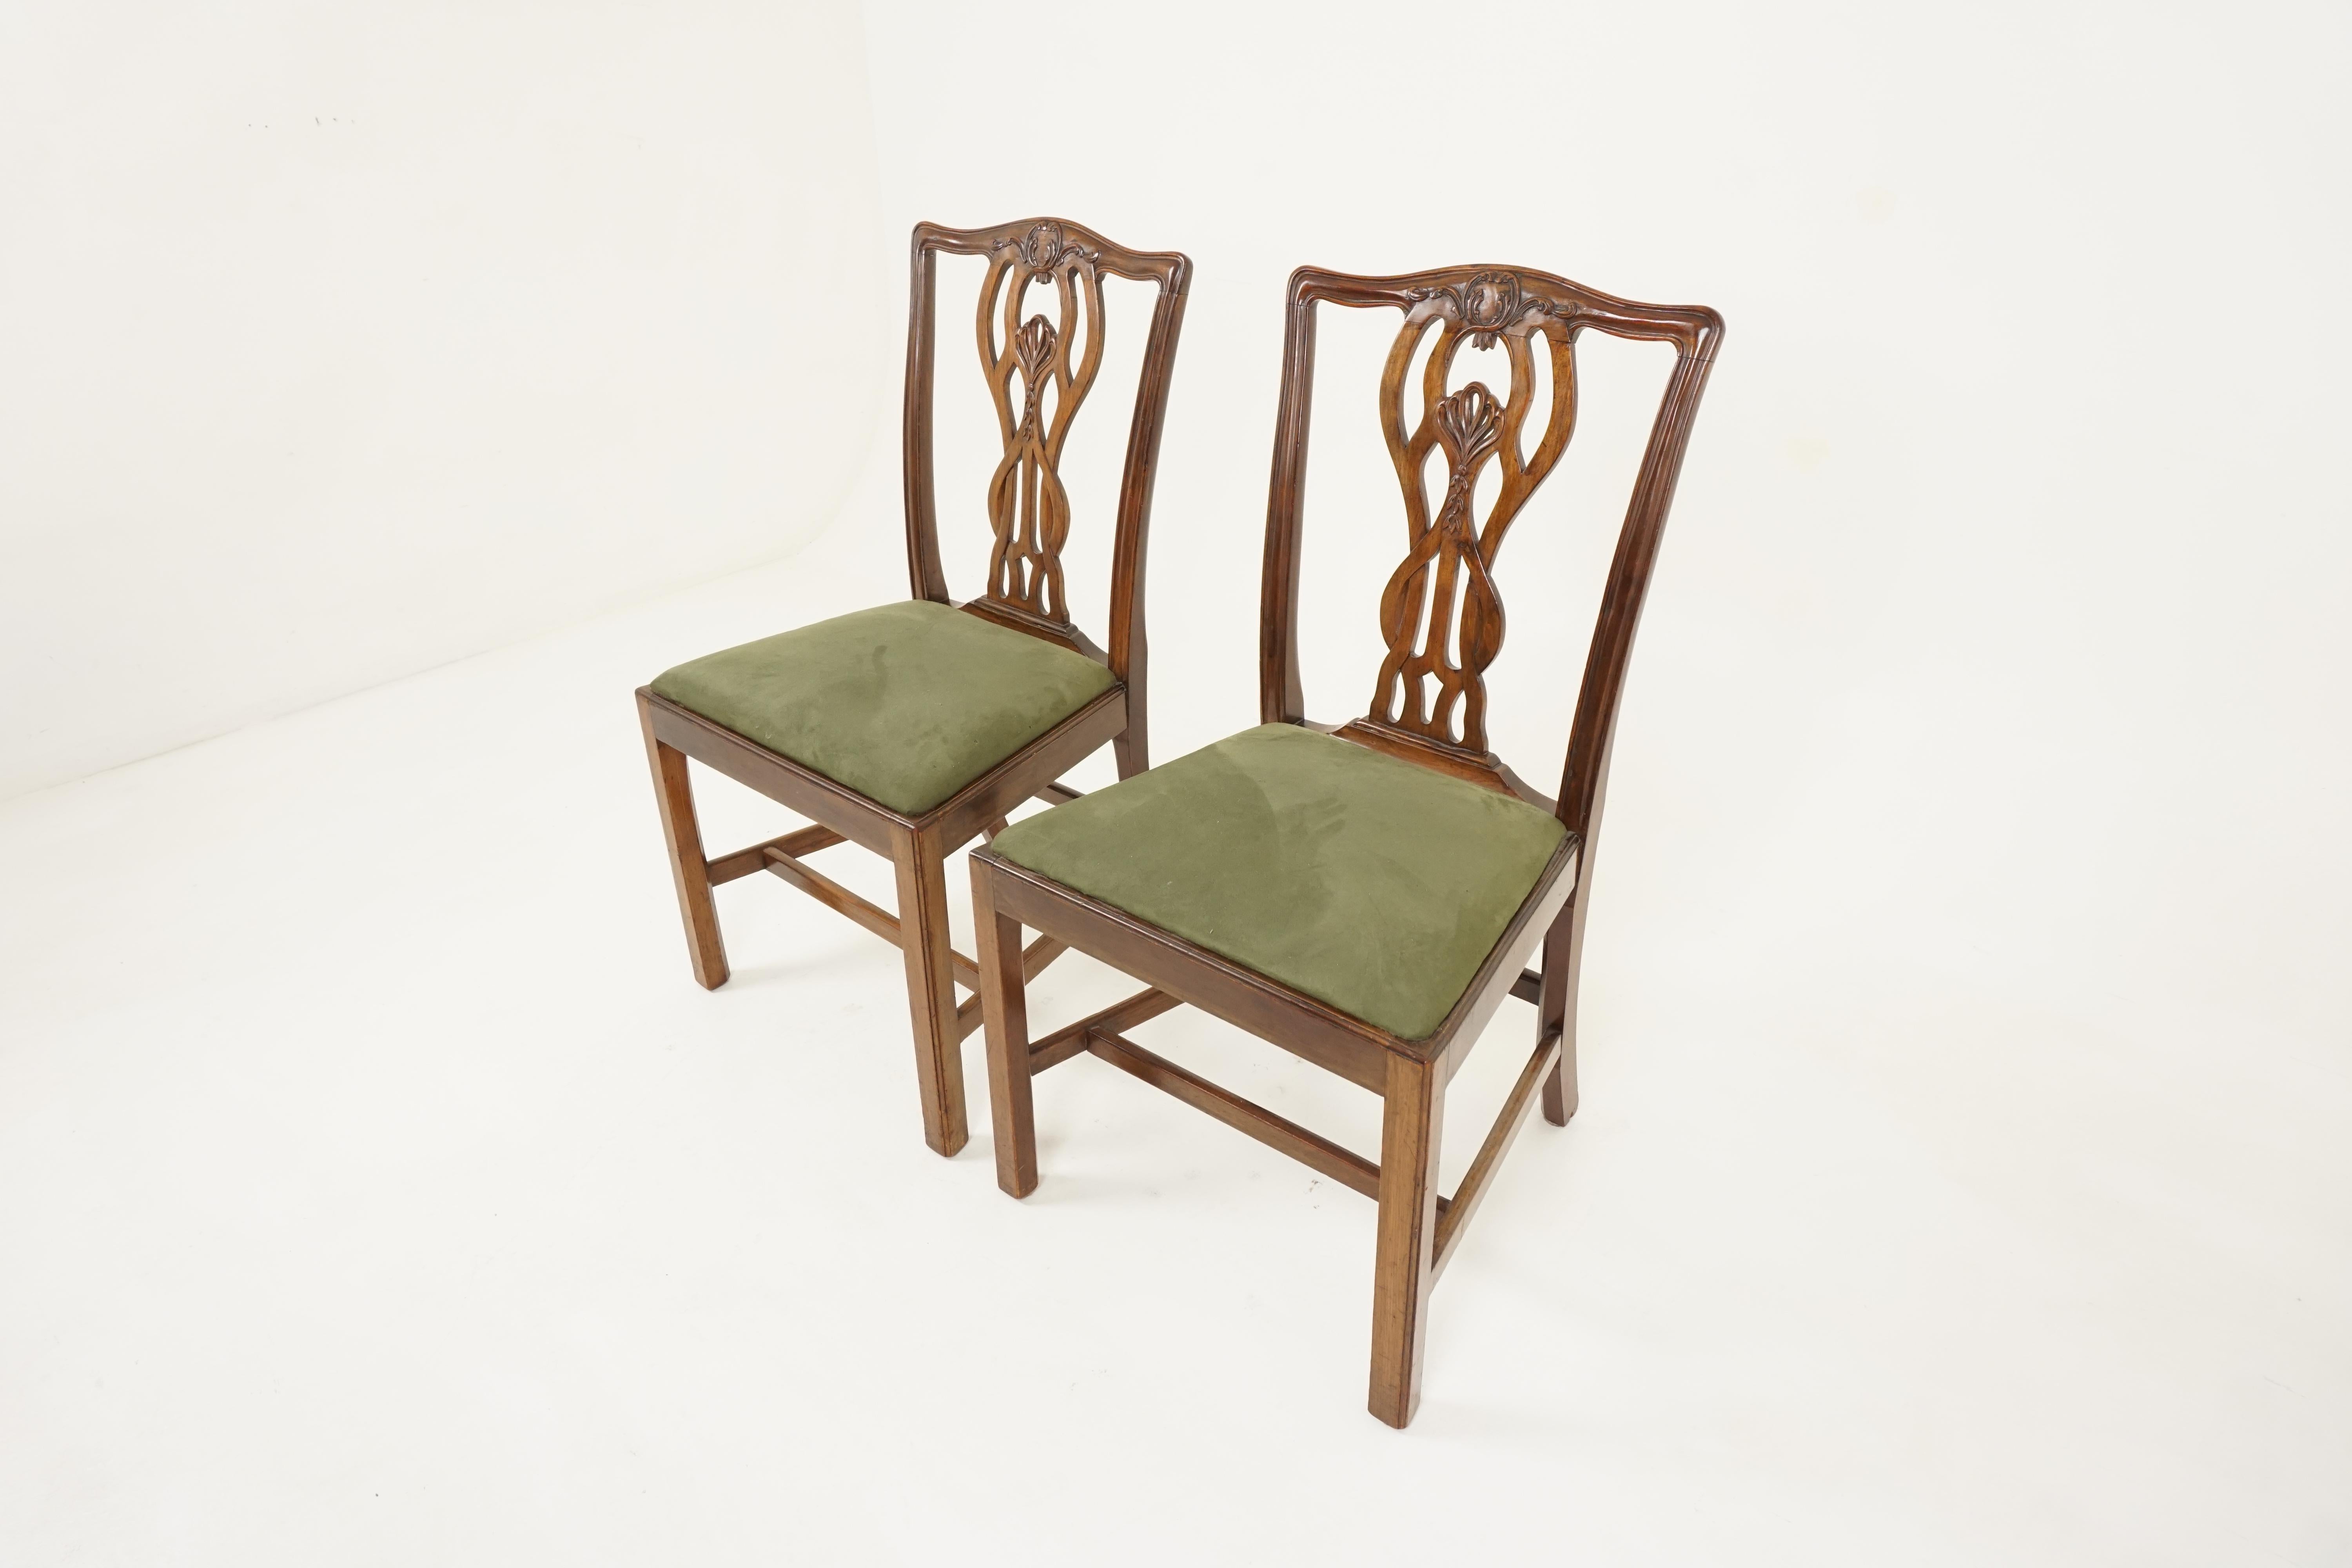 Pair of vintage dining chairs, walnut, Chippendale style, Scotland 1930, B2722

Scotland 1930
Solid walnut
Original finish
Carved top rail
Pierced splats to the back
Drop in seats
All standing on square legs
Connected by stretchers
Solid